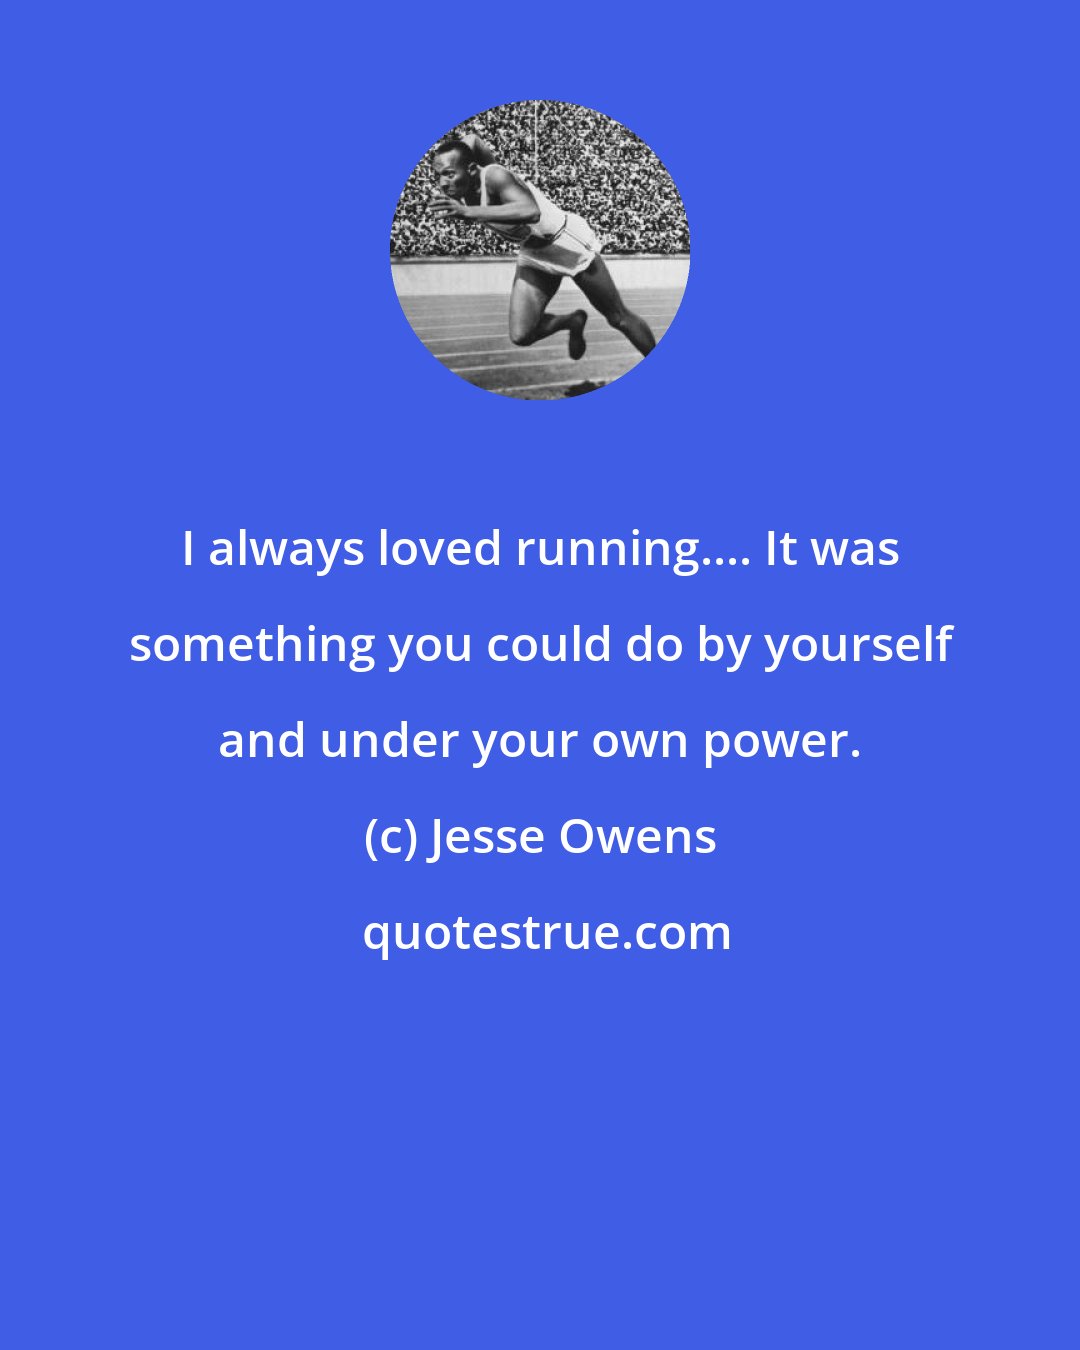 Jesse Owens: I always loved running.... It was something you could do by yourself and under your own power.